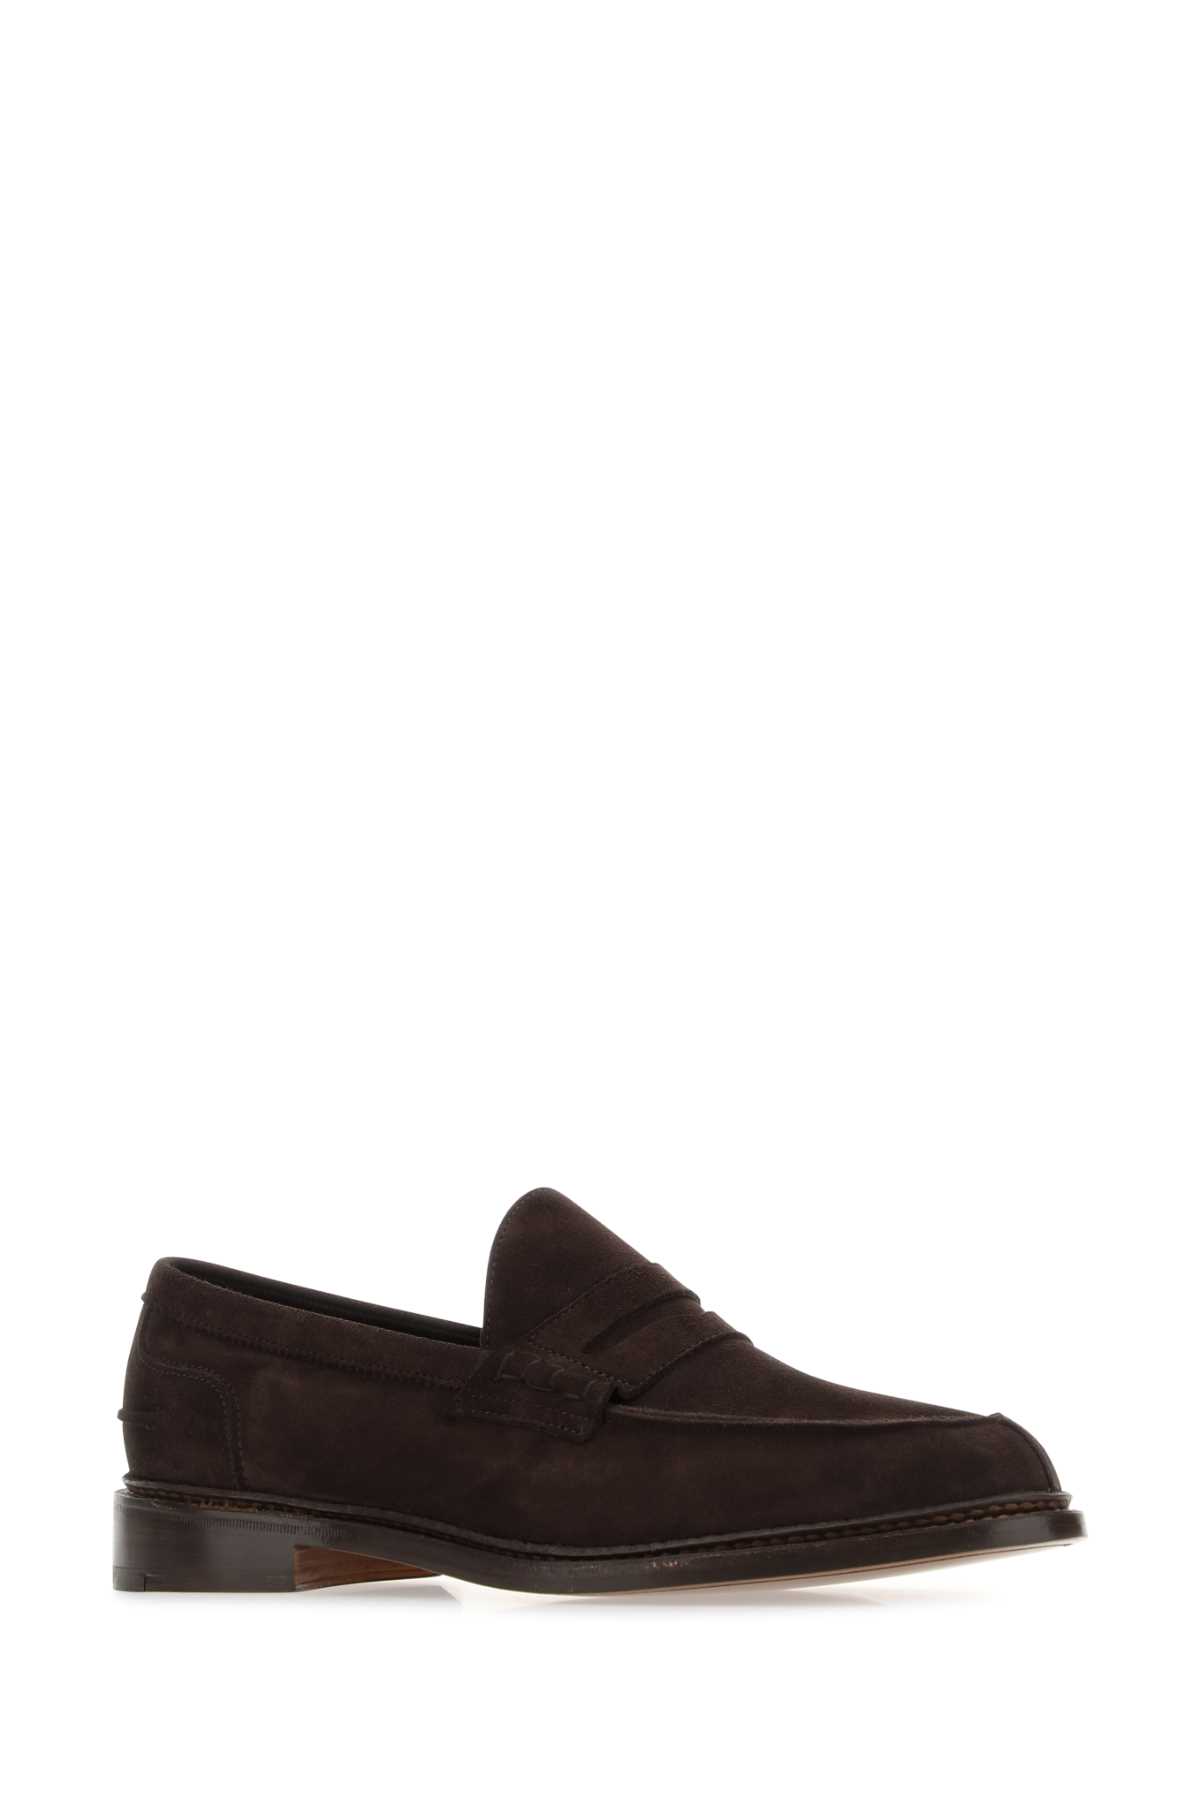 Tricker's Brown Suede Adam Loafers In Coffee